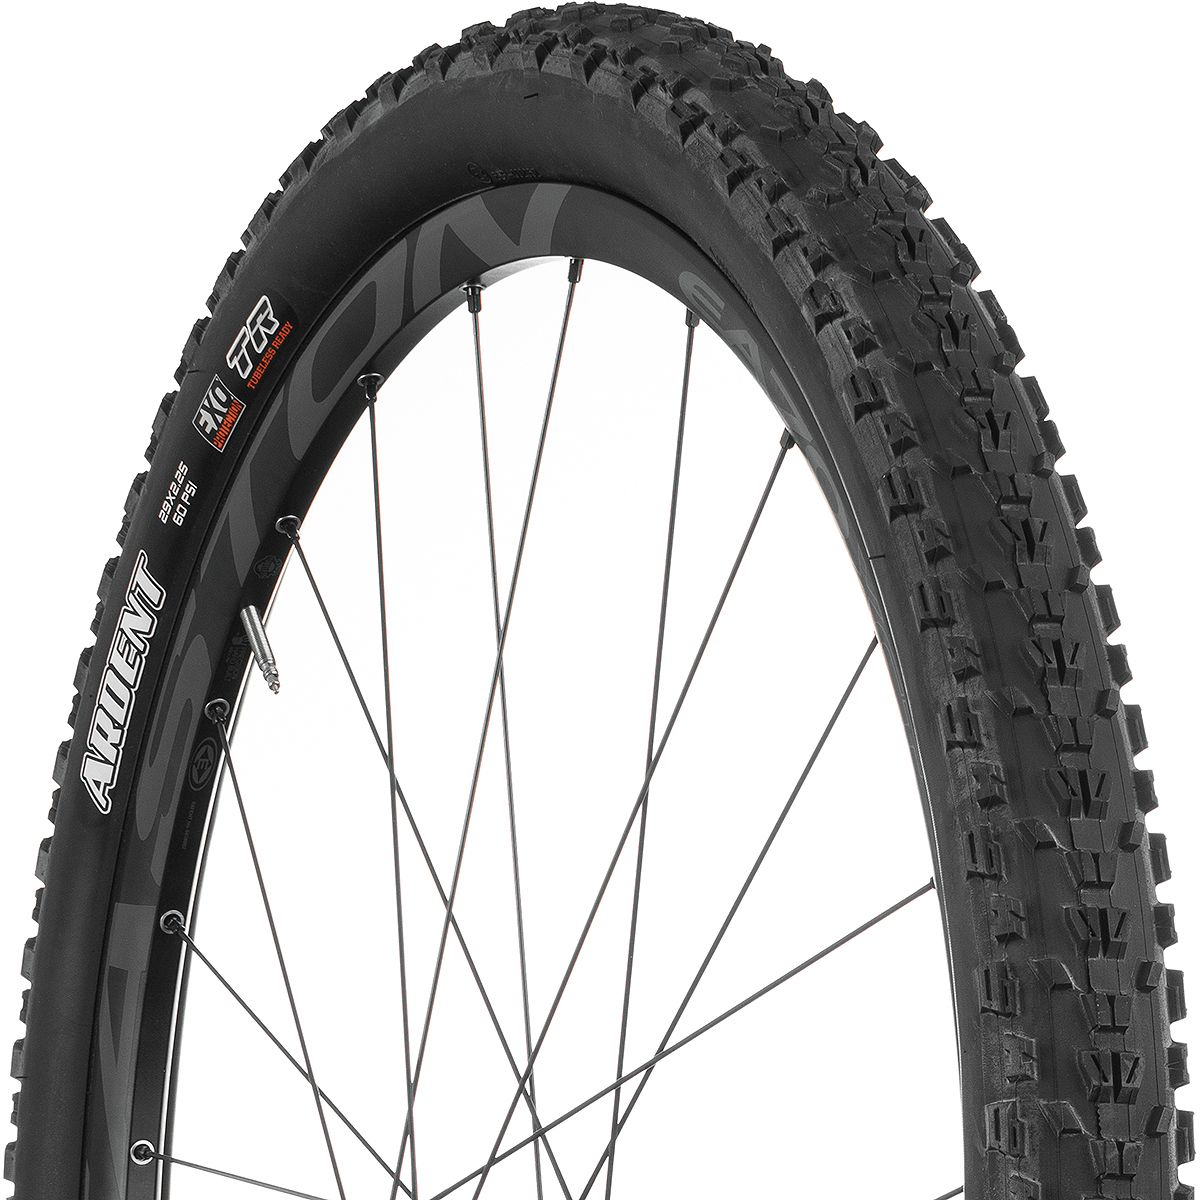 Maxxis Ardent EXO TR 29in Tire Black, Dual Compound, 29x2.25